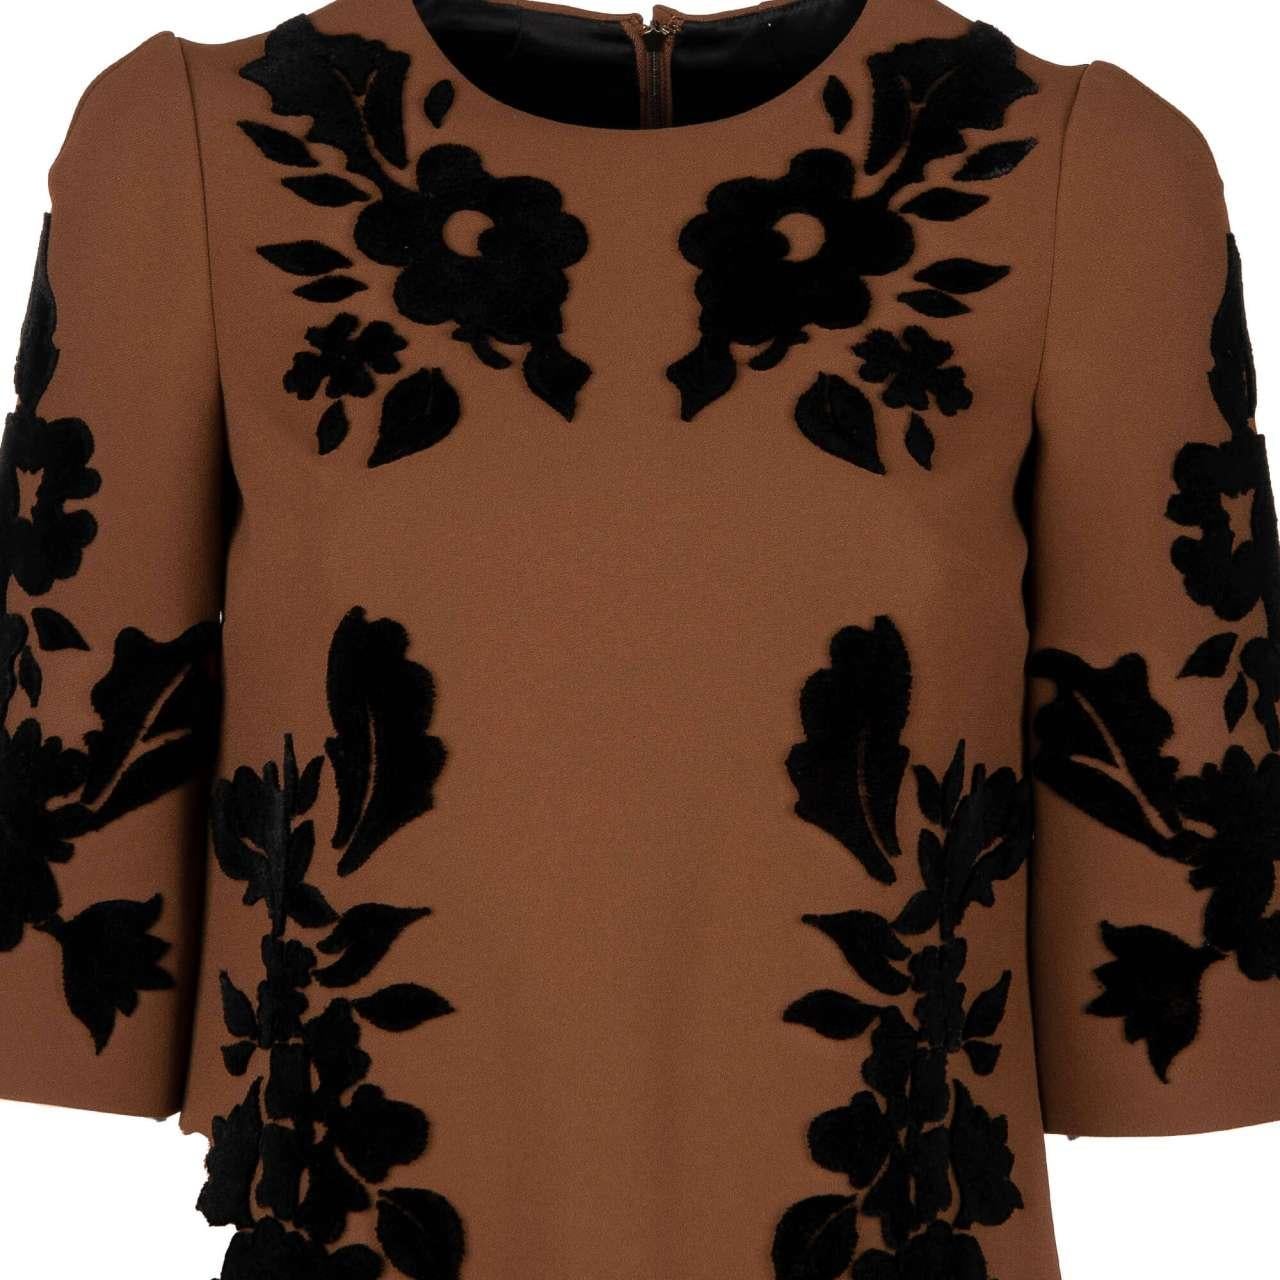 Dolce & Gabbana - Baroque Embroidery Dress Brown IT 36 In Excellent Condition For Sale In Erkrath, DE